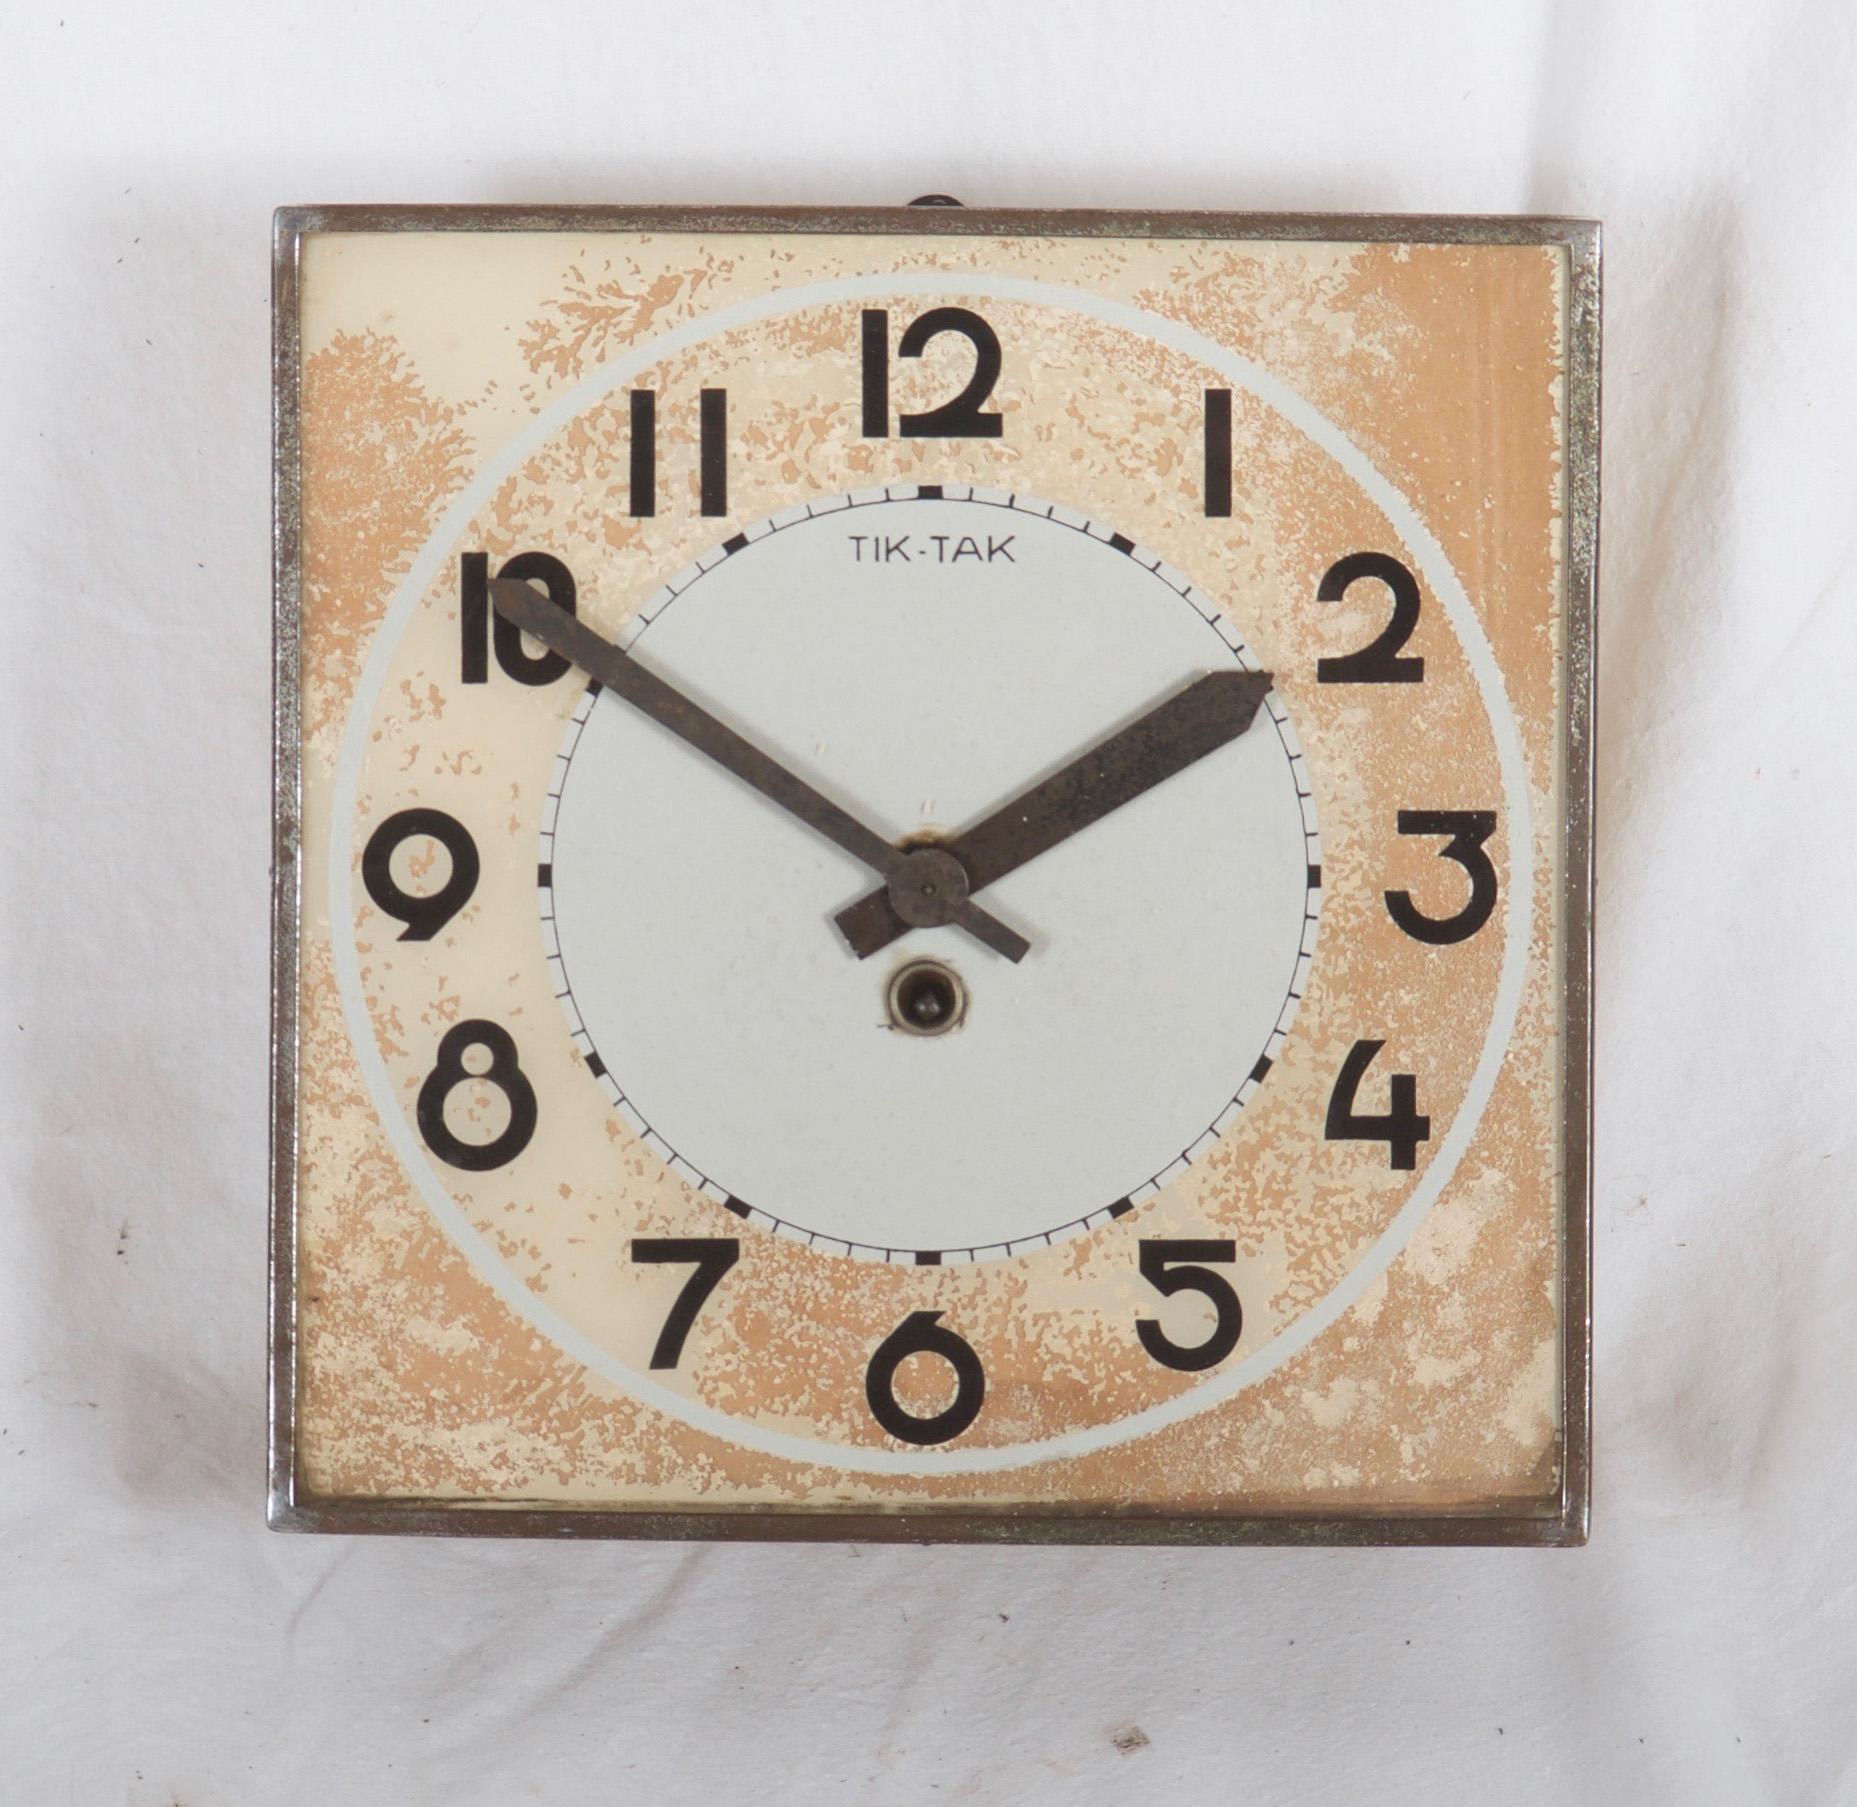 Wooden frame with white glass and black digits caught in steel signed TIK-TAK made in the 1930s. The original movement will be changed to an electric one powered by a small battery.
Delivery time 2-3 weeks.